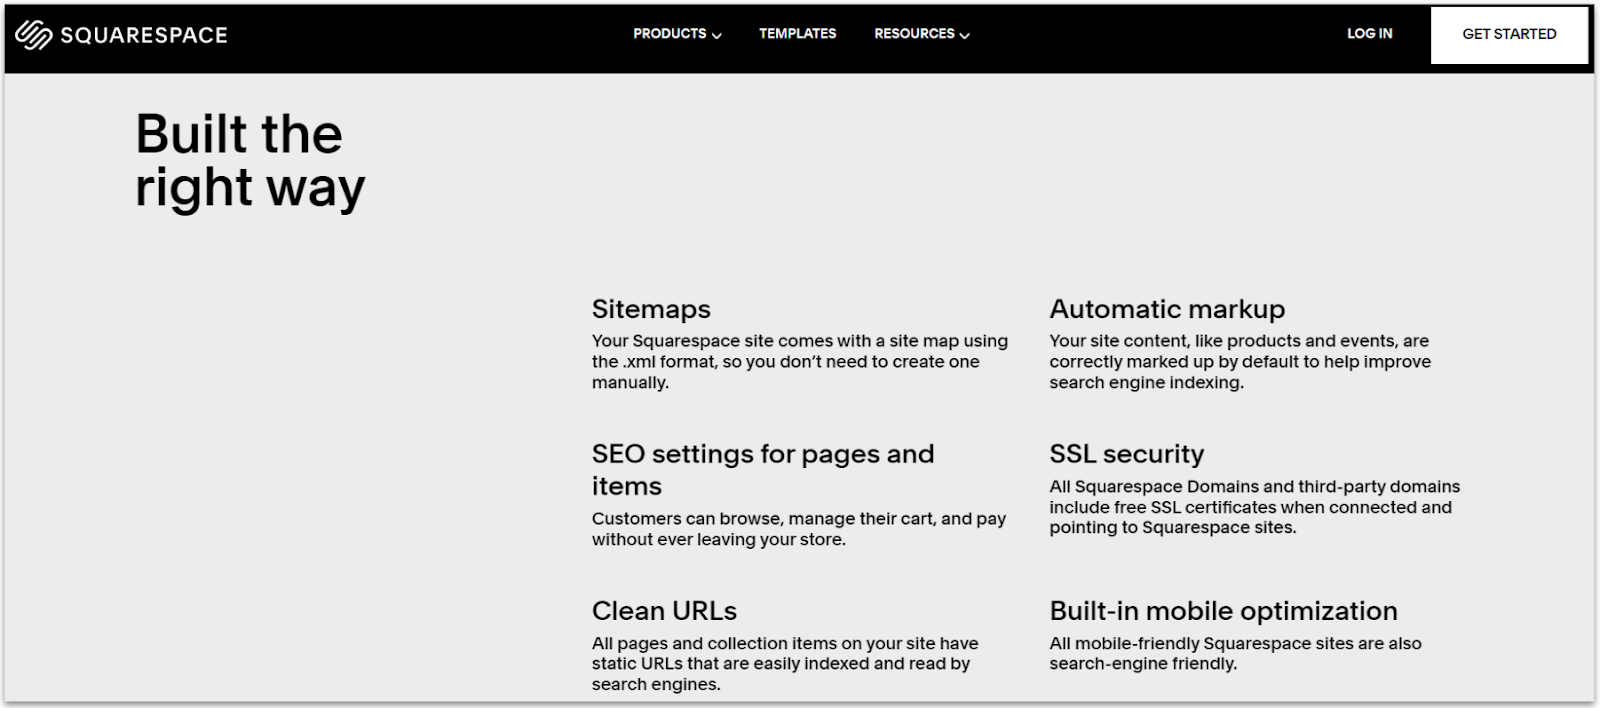 Squarespace SEO features and templates